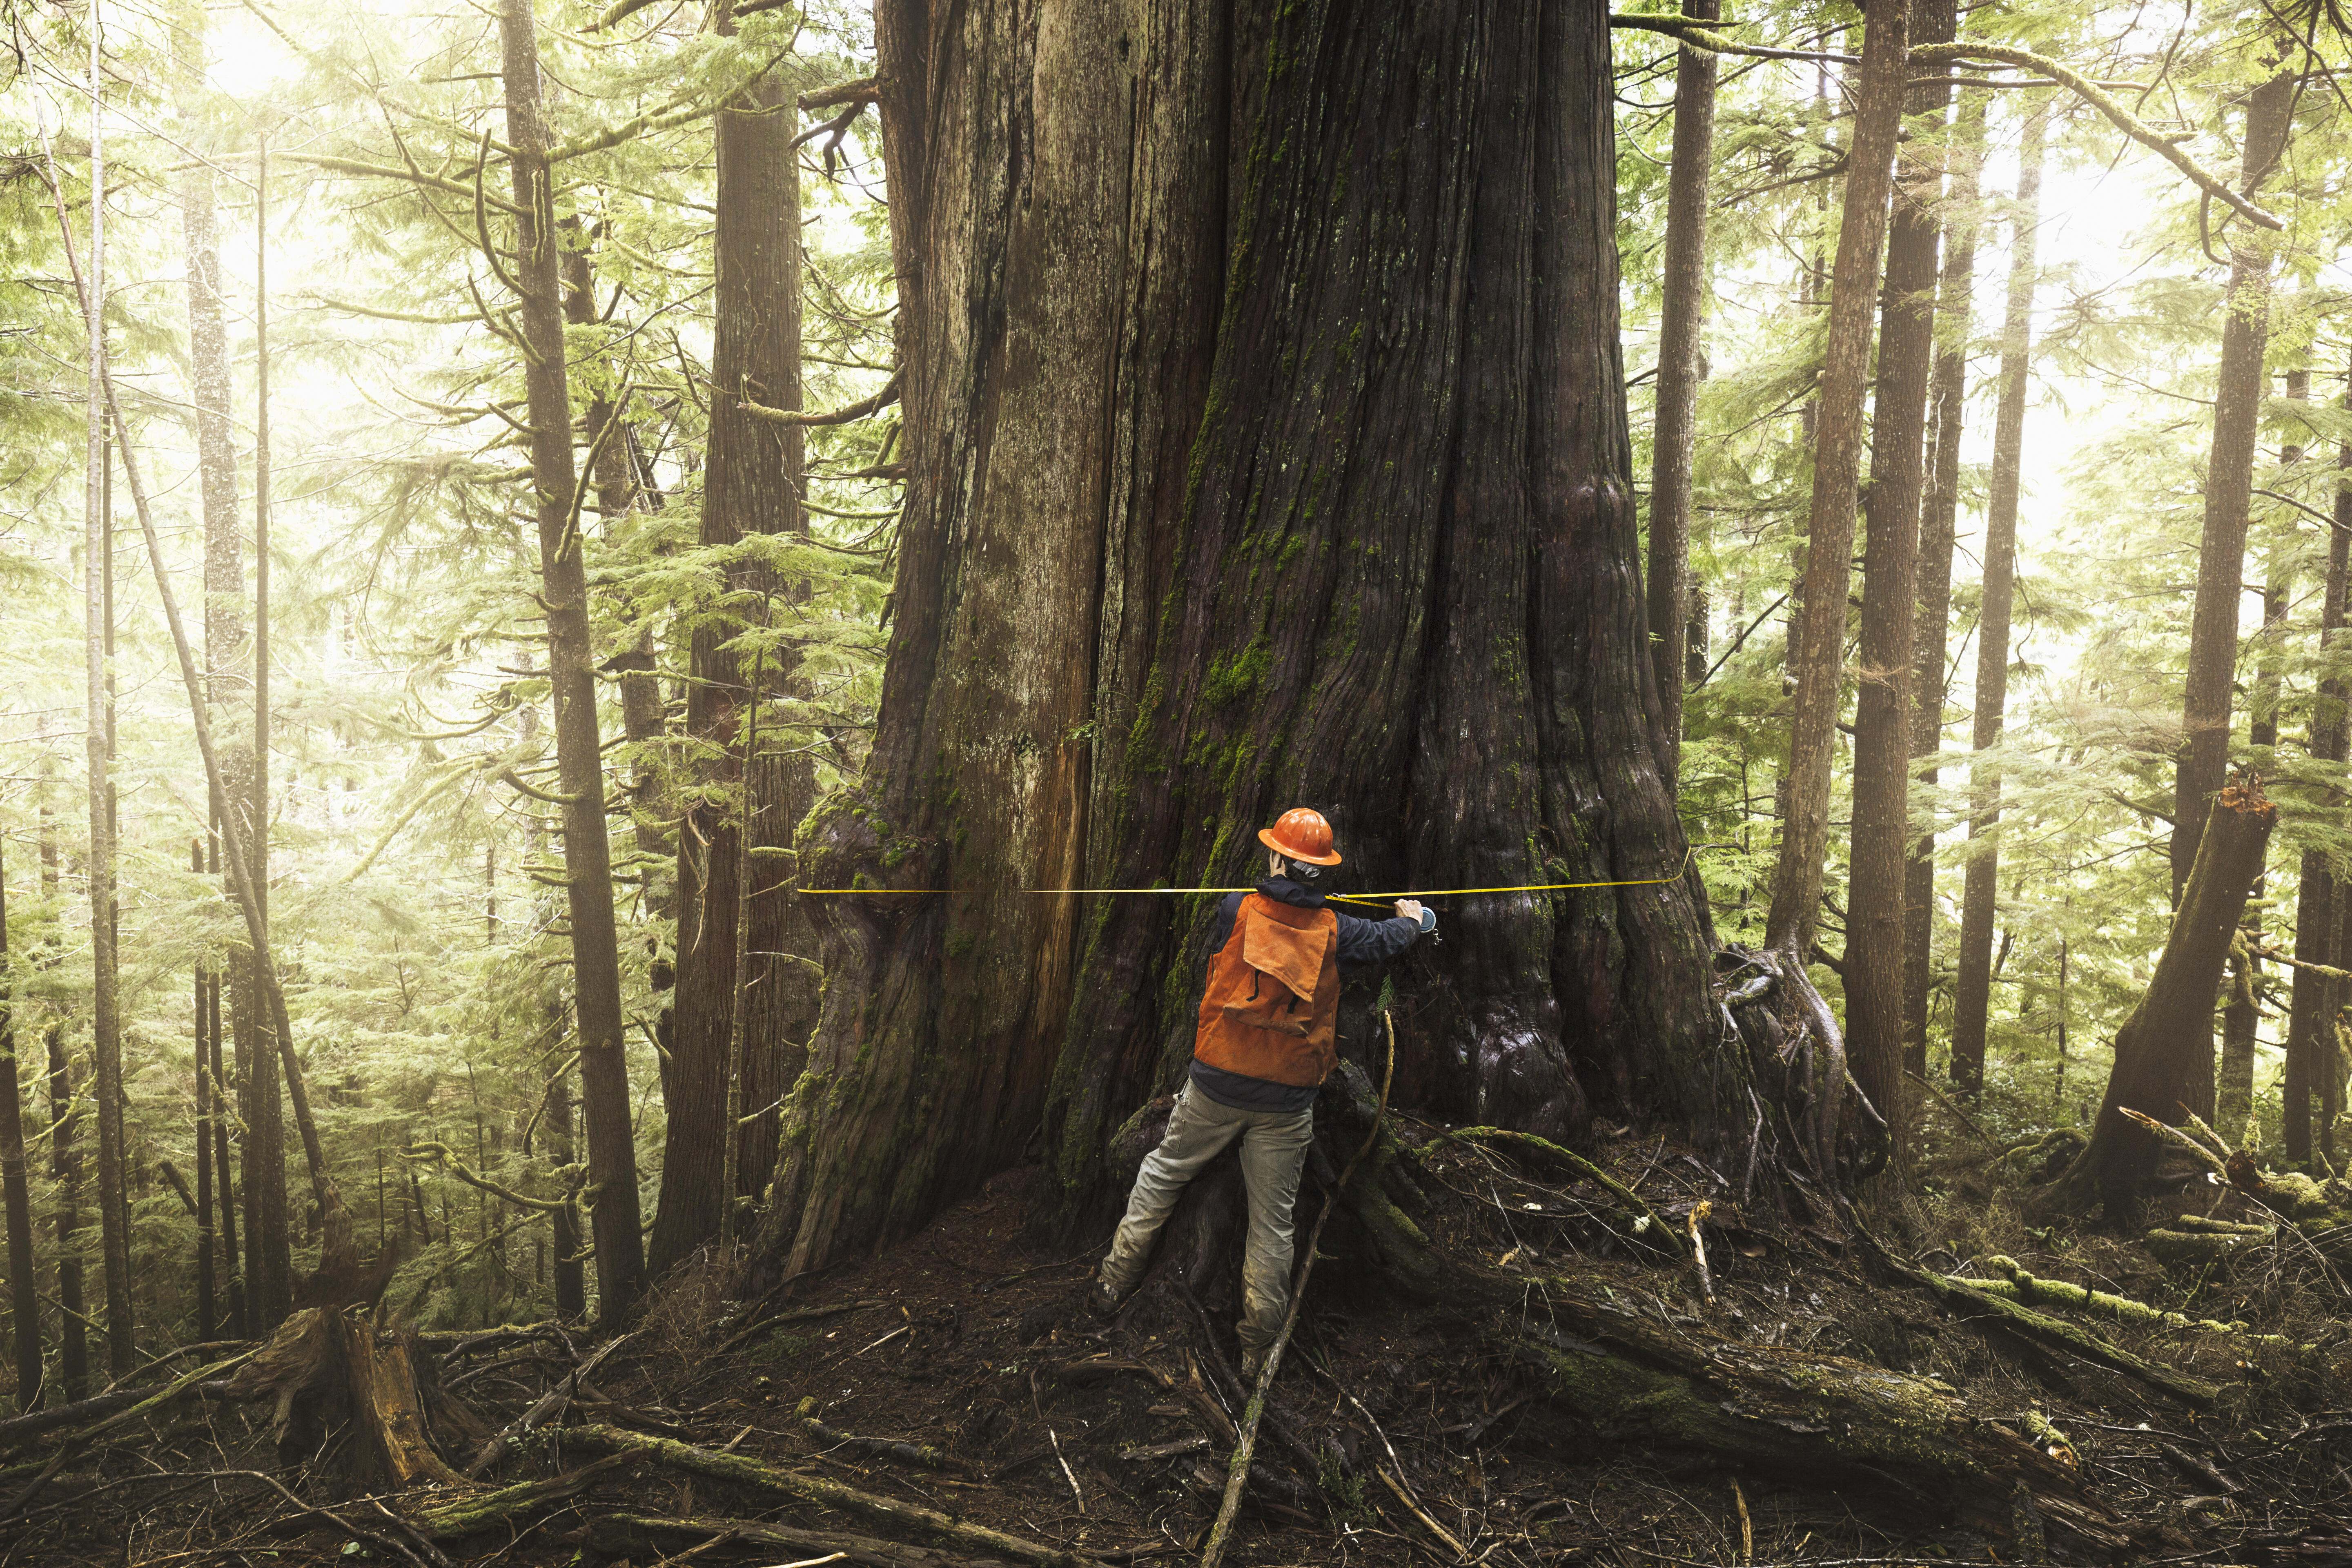 A man measures an ancient tree in an old-growth forest in Washington state.